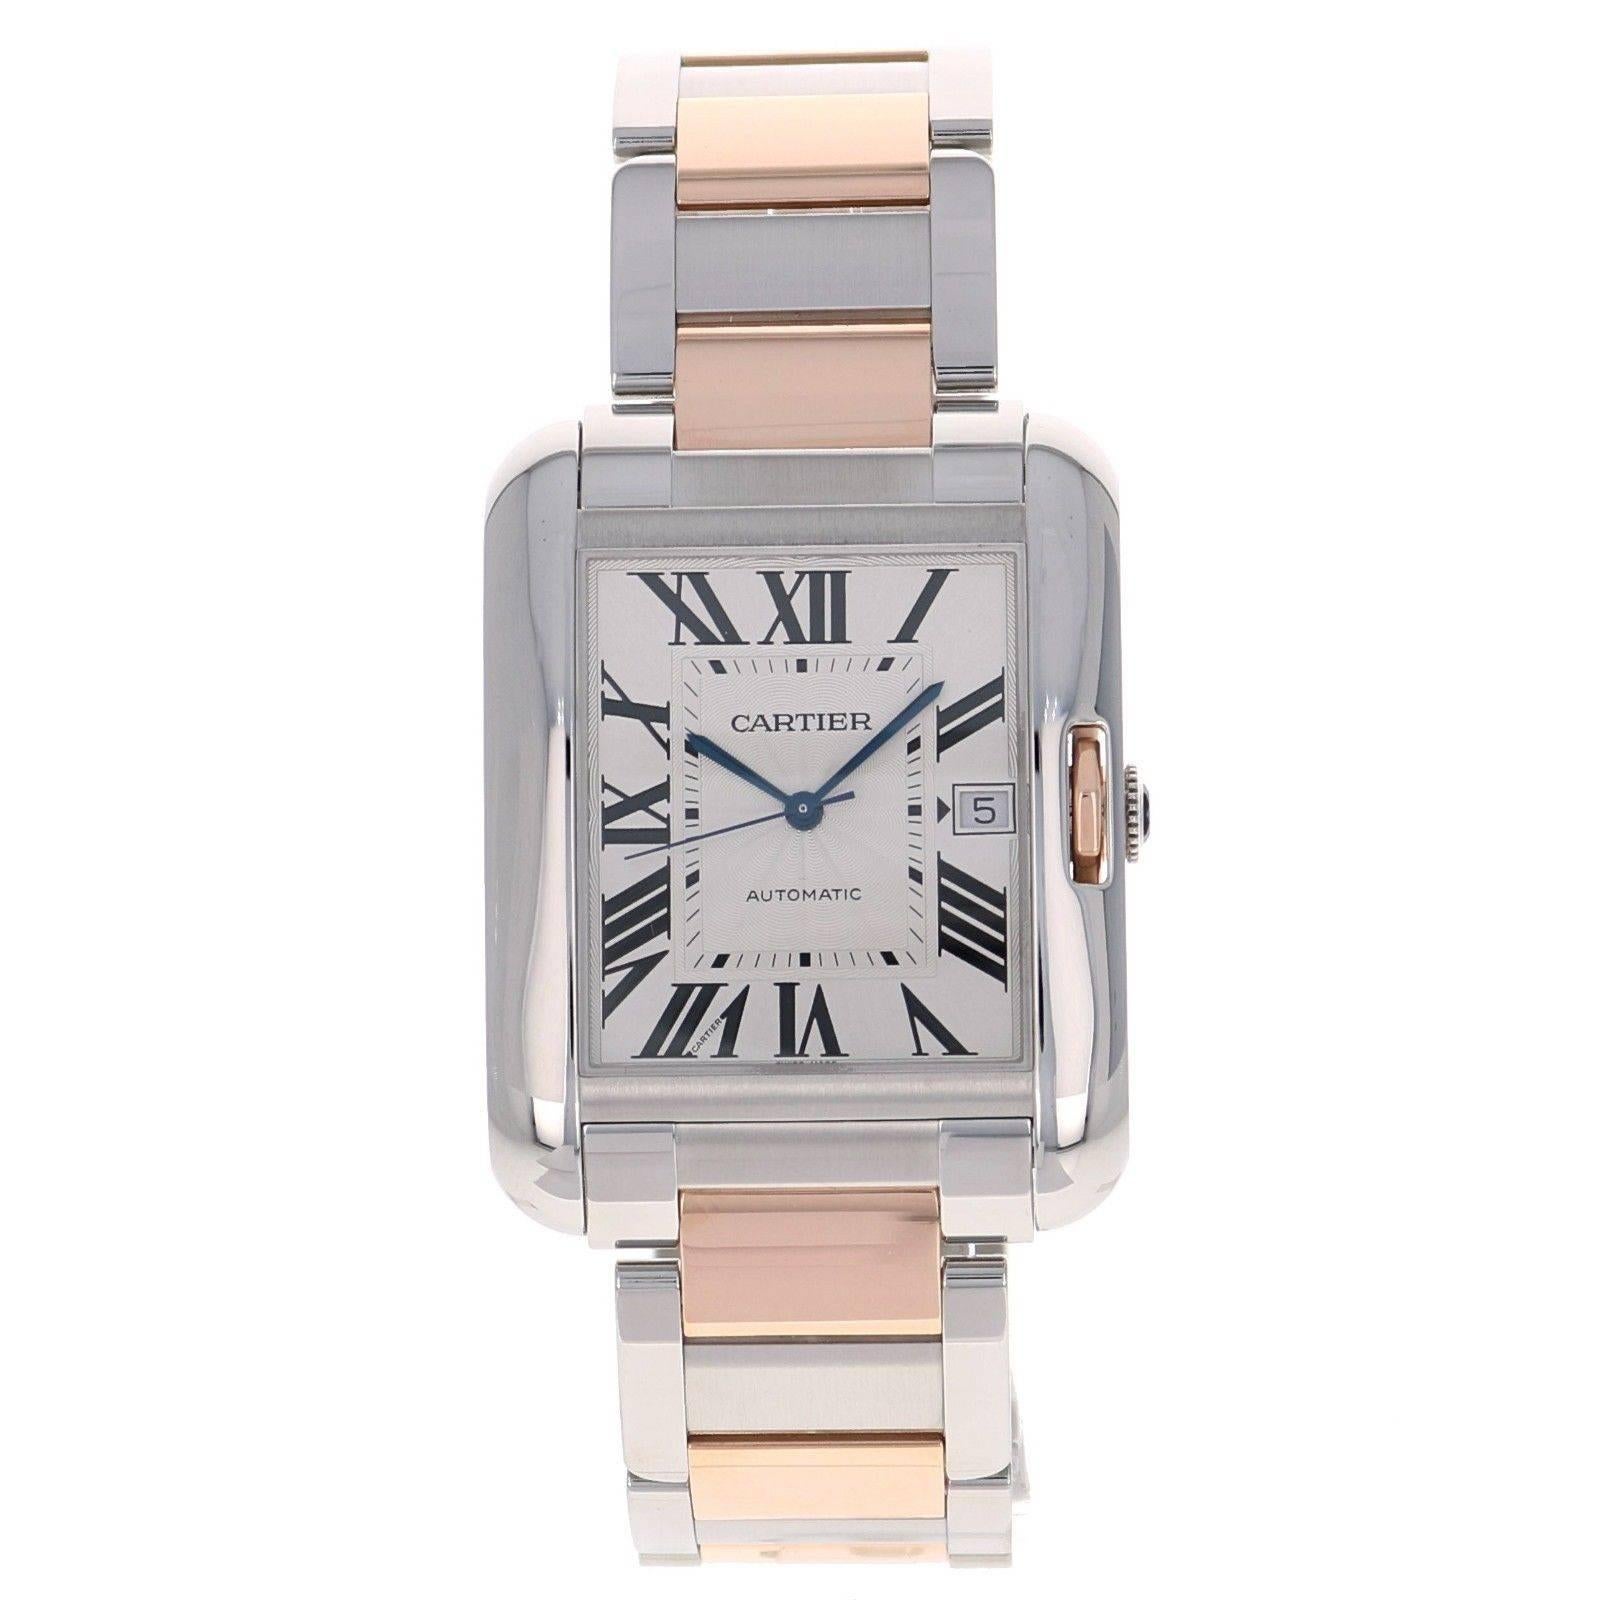 Brand Name  Cartier
Style Number  W5310006
Series  Tank Anglaise XL 
Gender  Men's 
Case Material  Stainless Steel 
Dial Color  Silver 
Movement  Automatic 
Engine  Cal. 1904MC 
Functions  Hours, Minutes, Seconds, Date 
Crystal Material  Sapphire